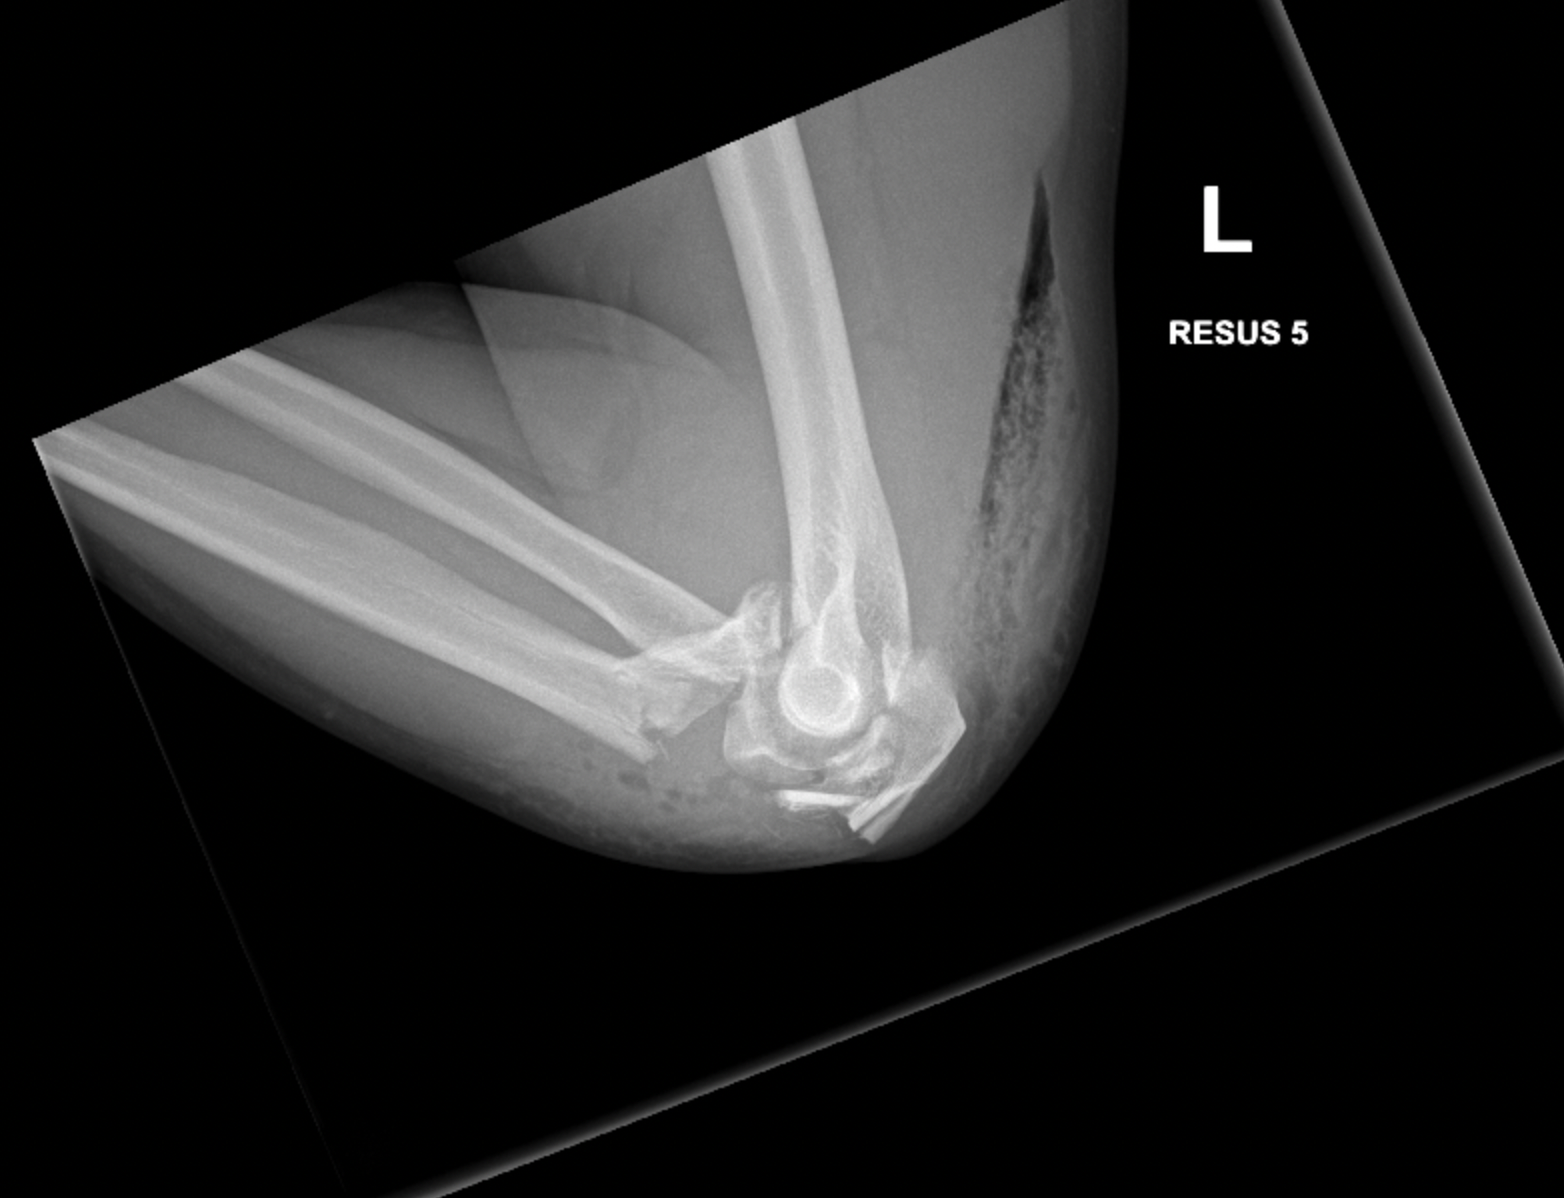 Elbow fracture dislocations 4